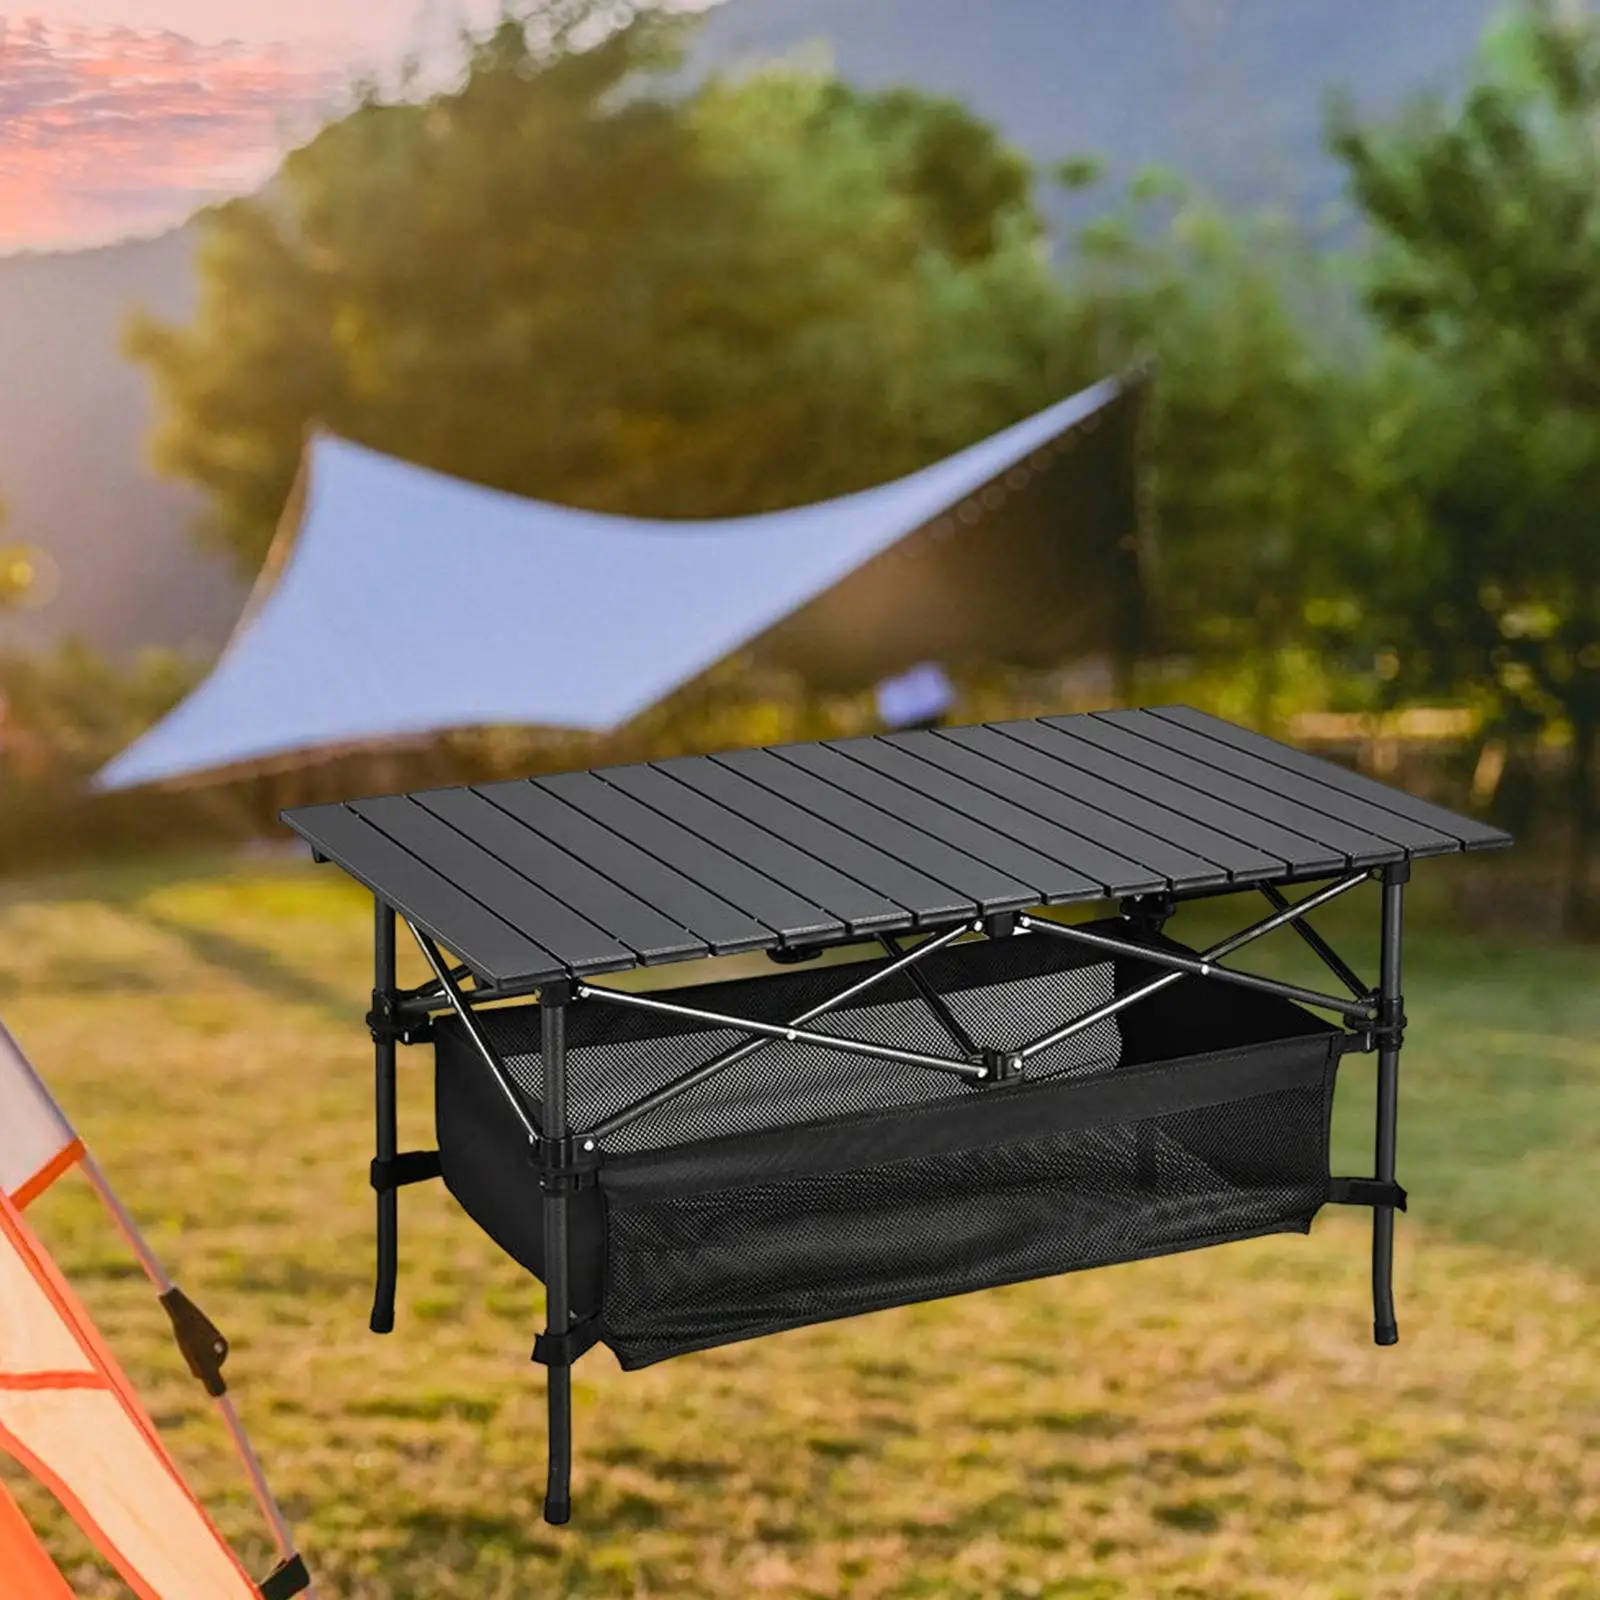 Camping Folding Table Aluminum with Large Storage Portable with Carrying Bag for Outdoor Indoor, Garden, Hiking, Picnic Desk